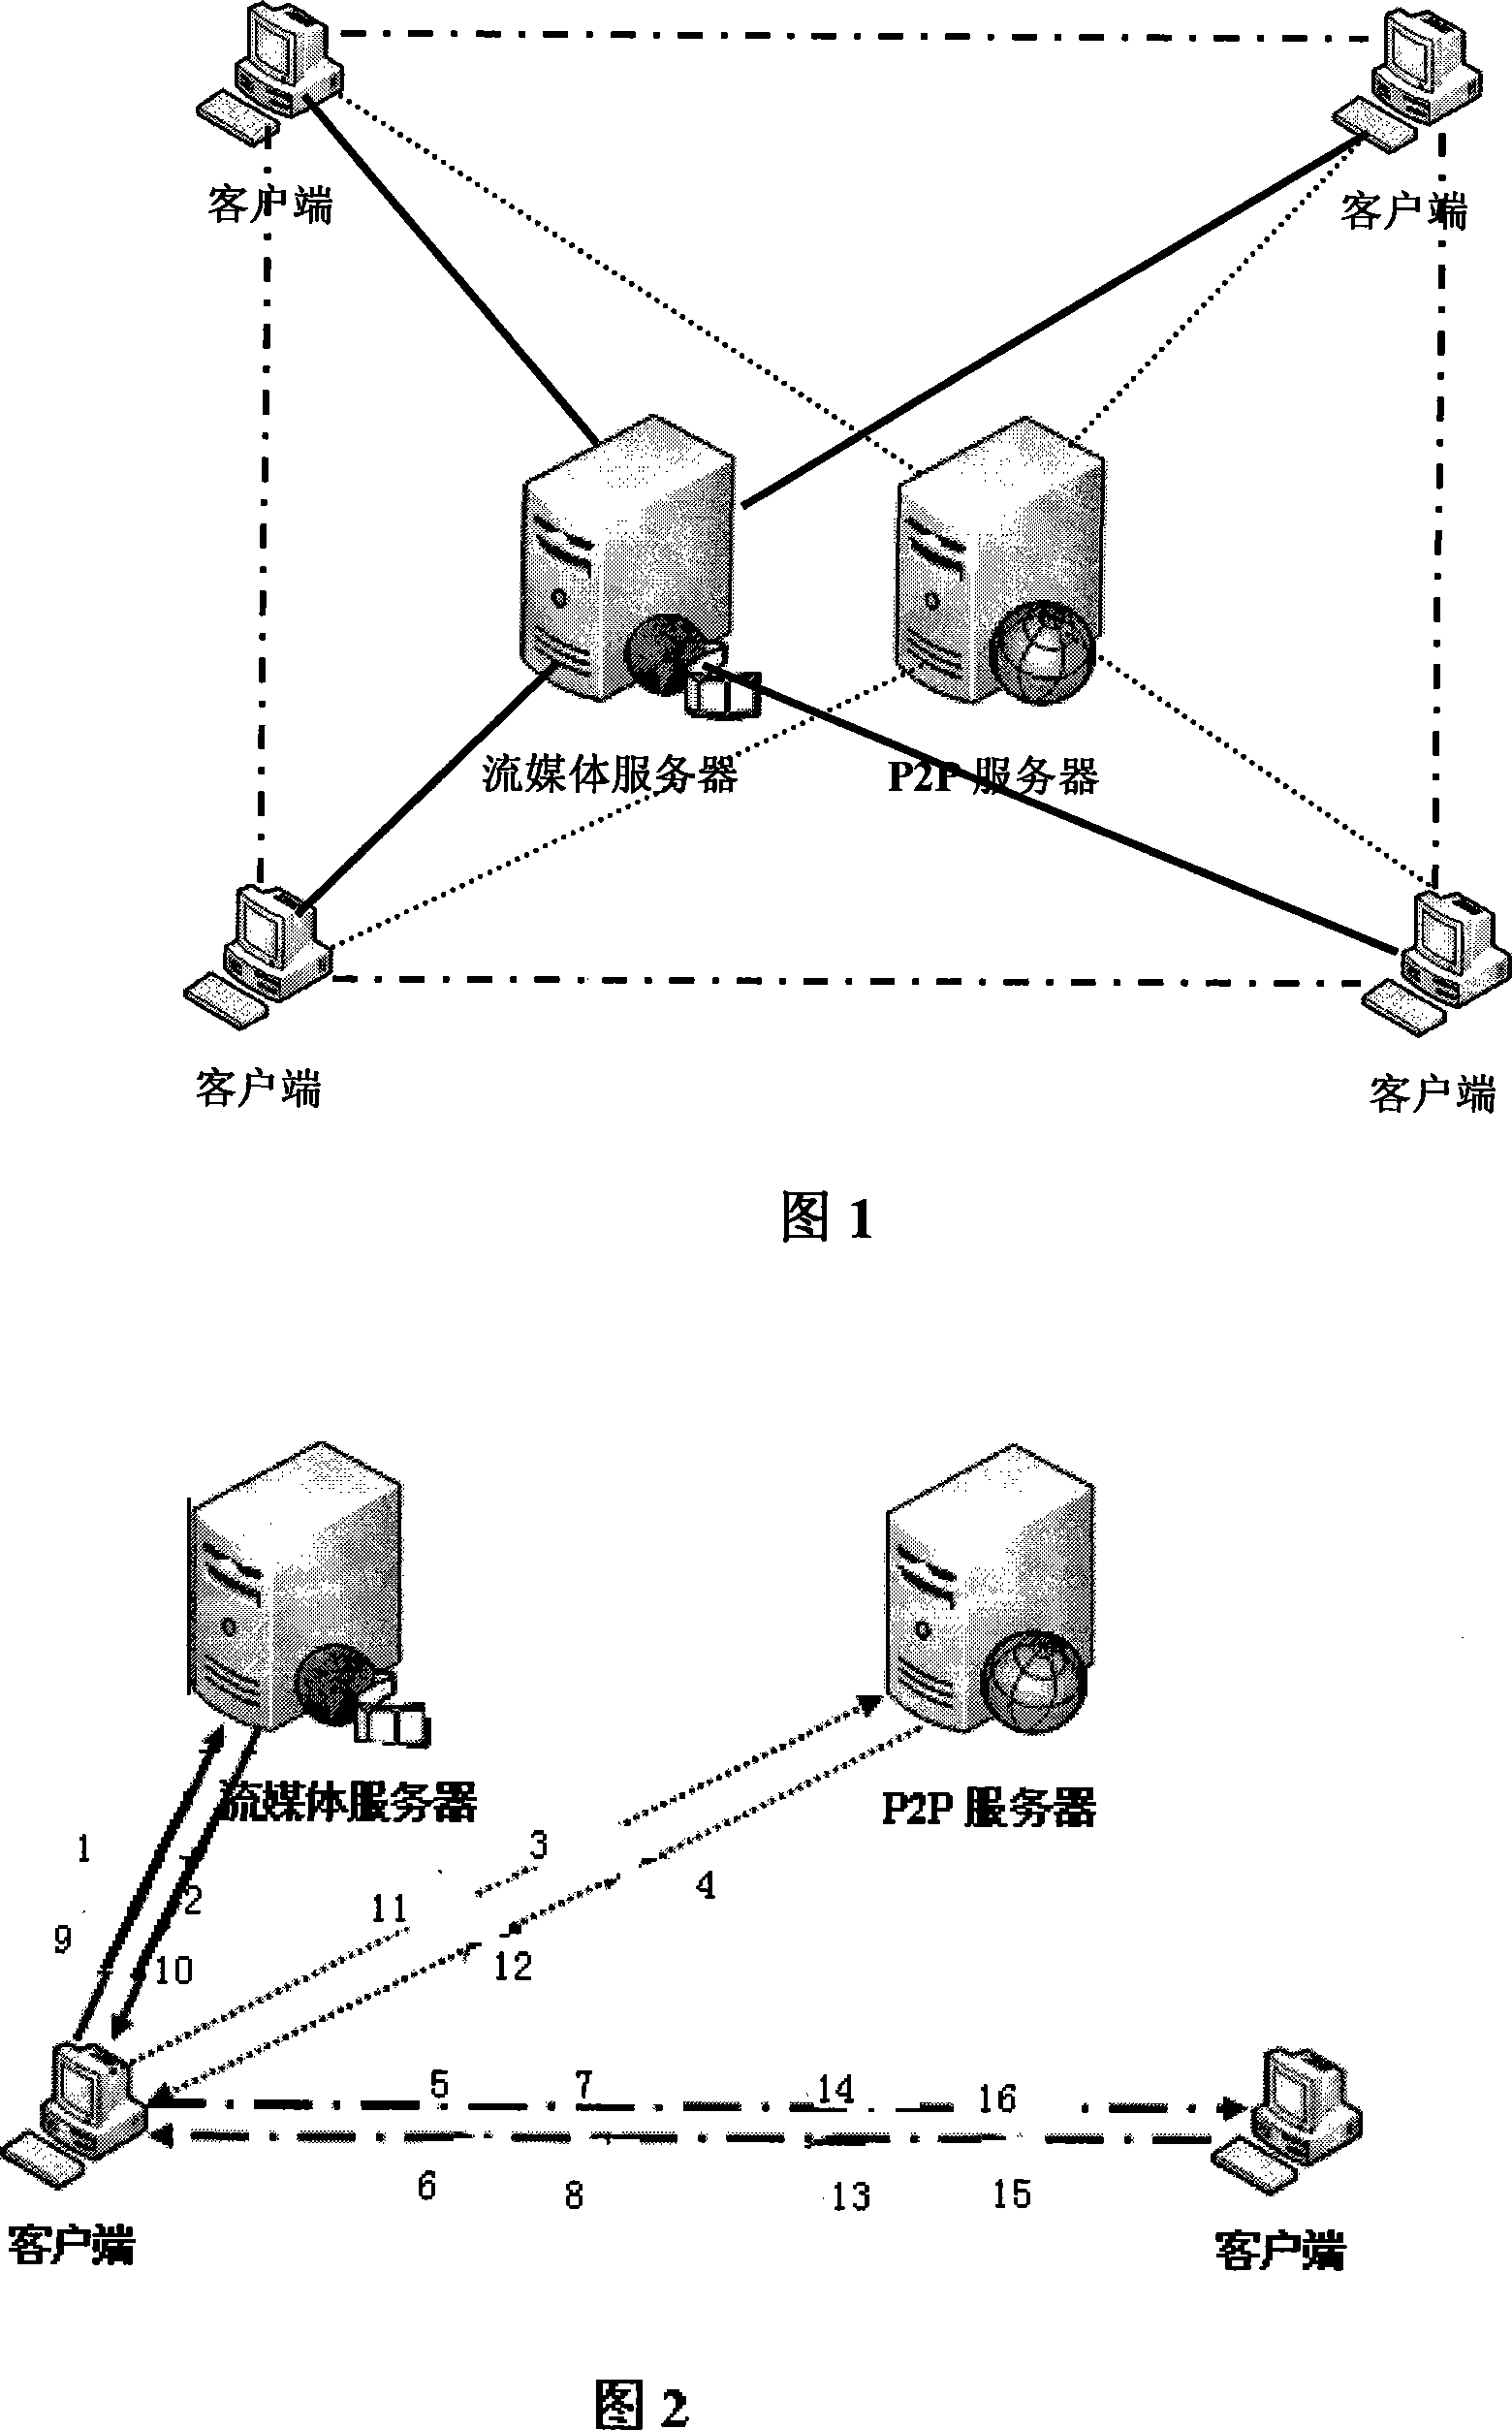 Method of implementing data transmission or stream media transmission using combination of HTTP and P2P